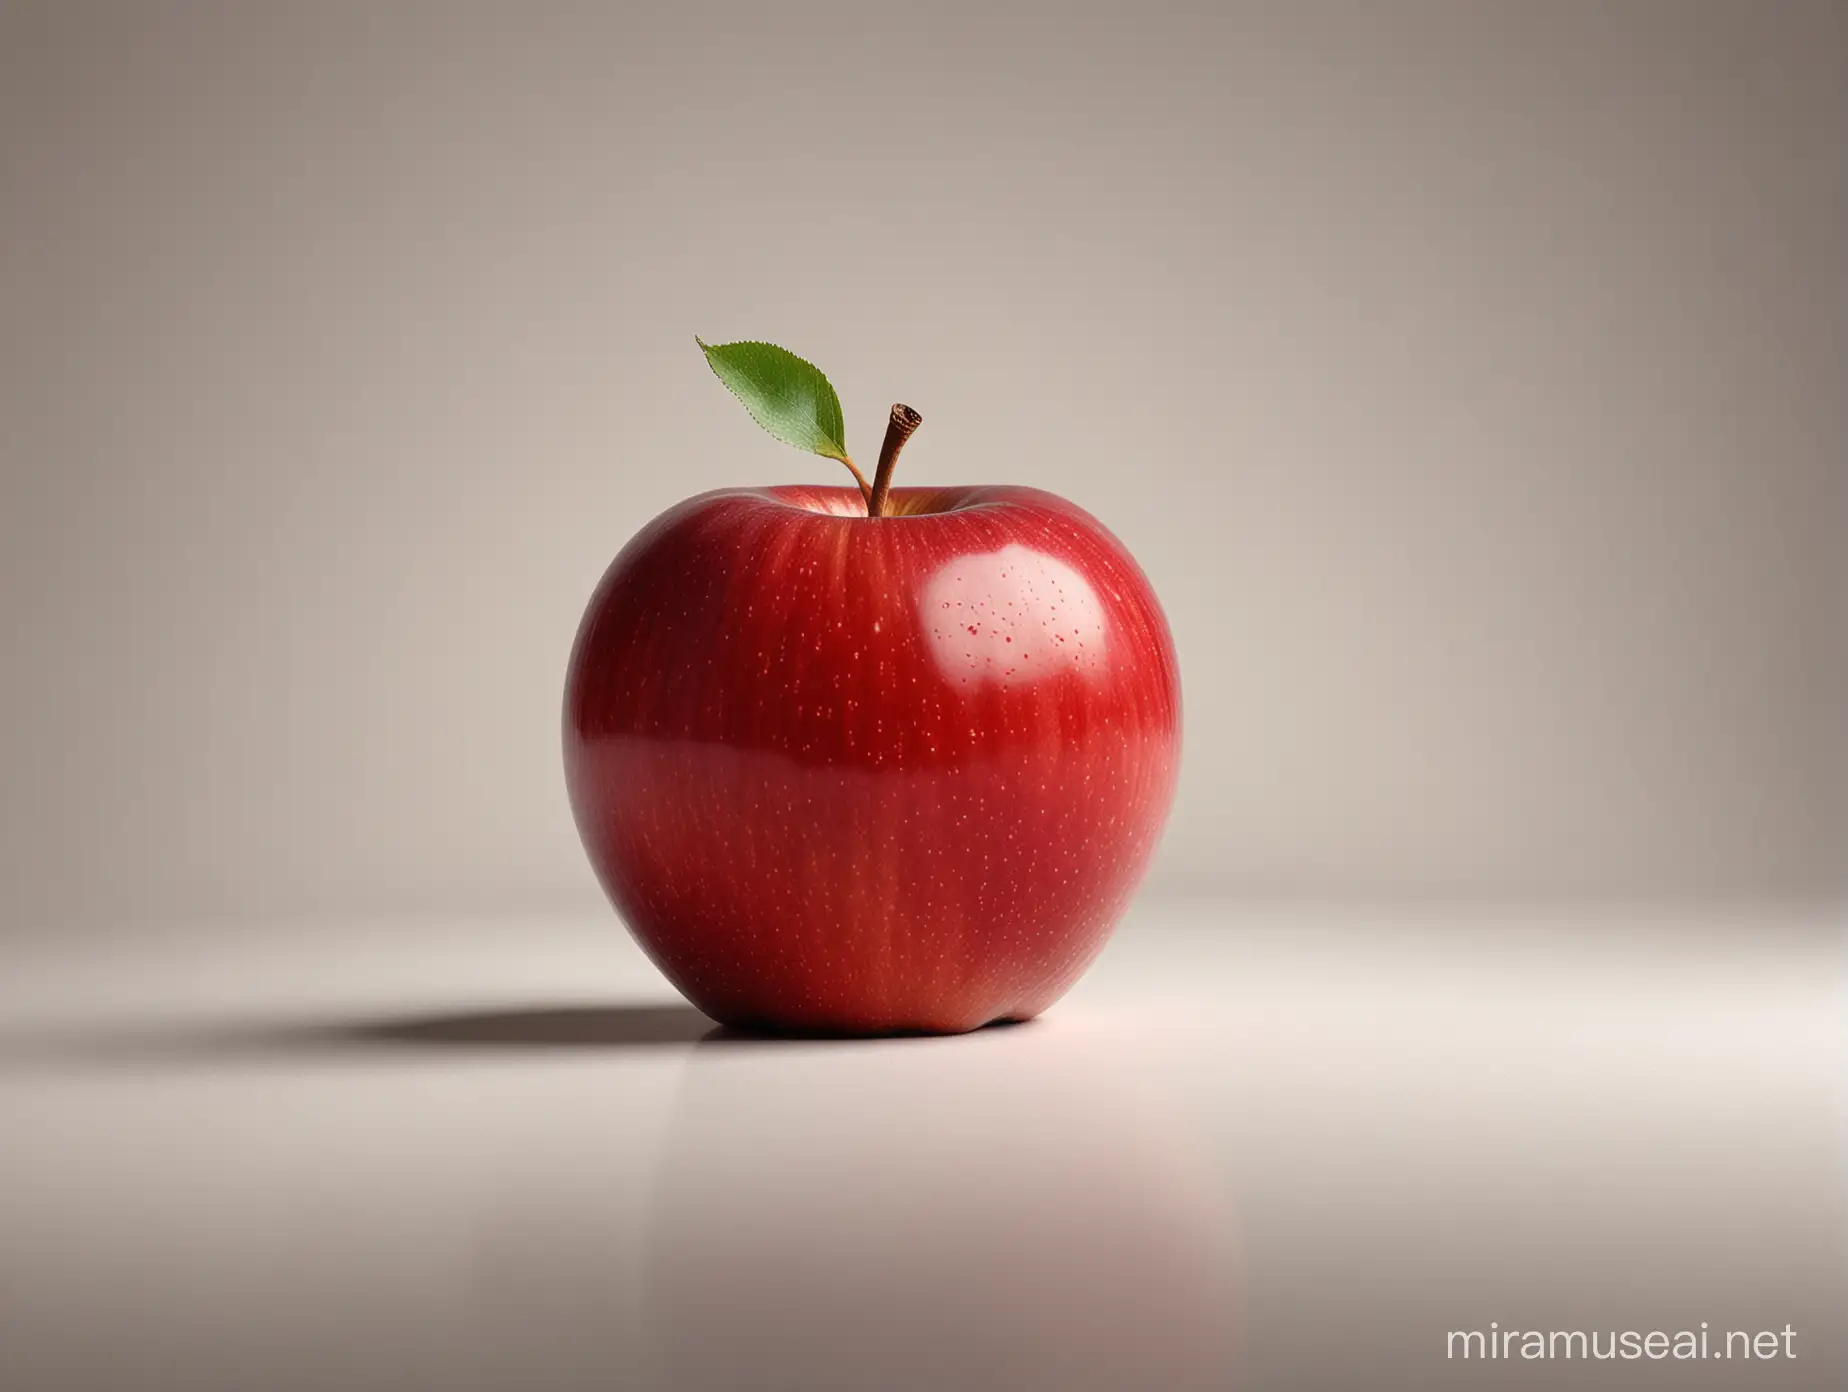 Flawless Red Apple Captivating Symbol of Natural Perfection